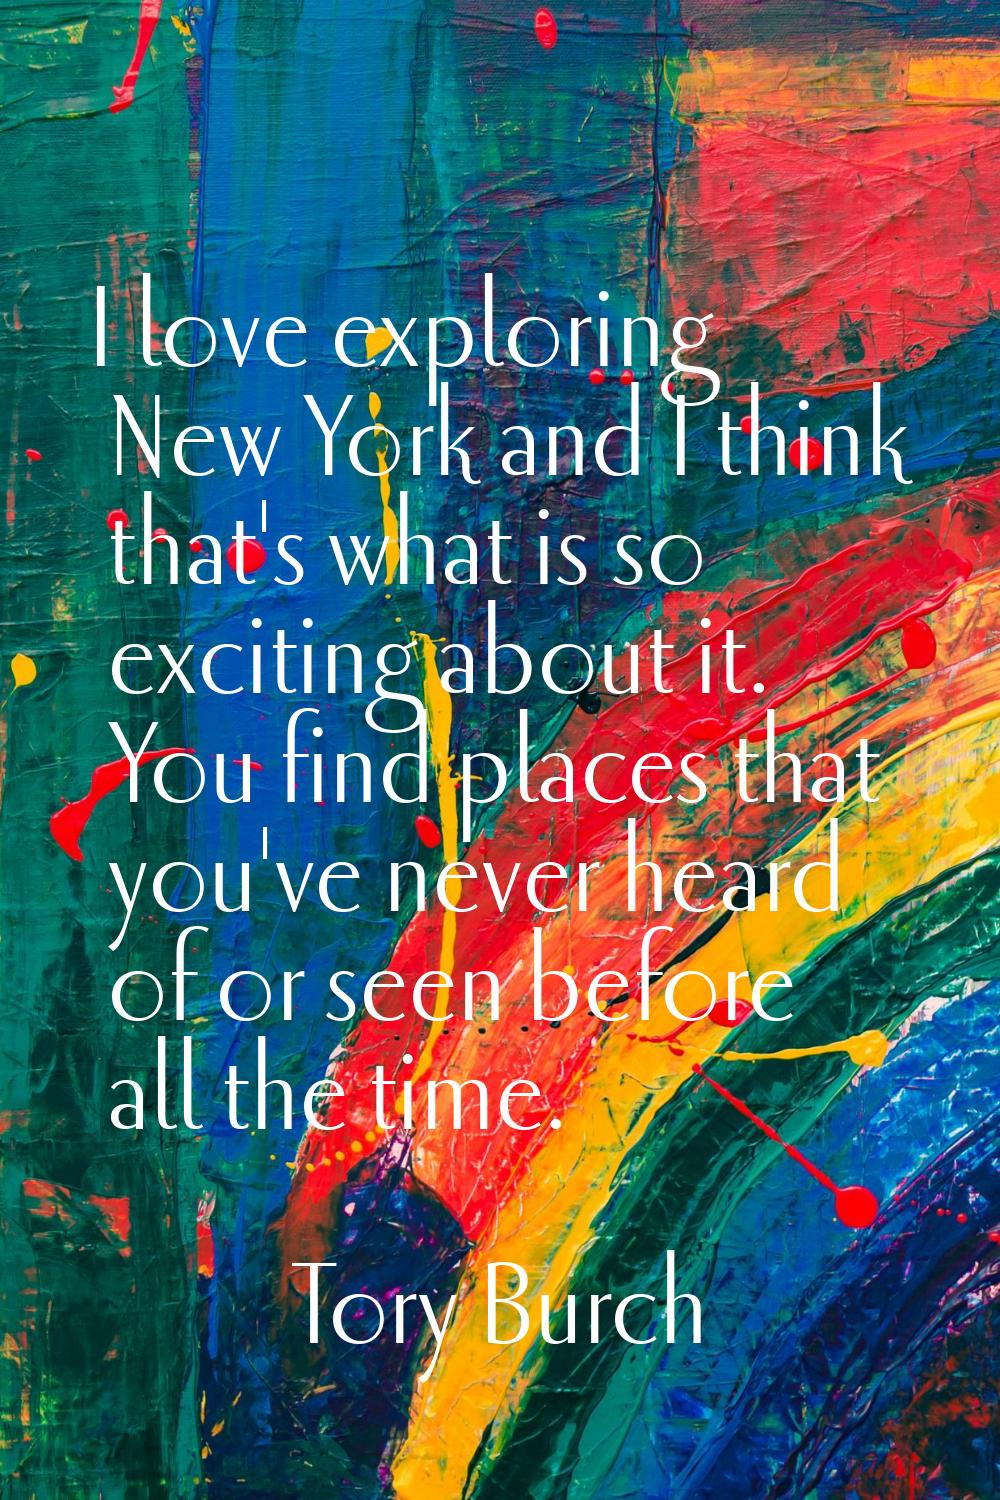 I love exploring New York and I think that's what is so exciting about it. You find places that you